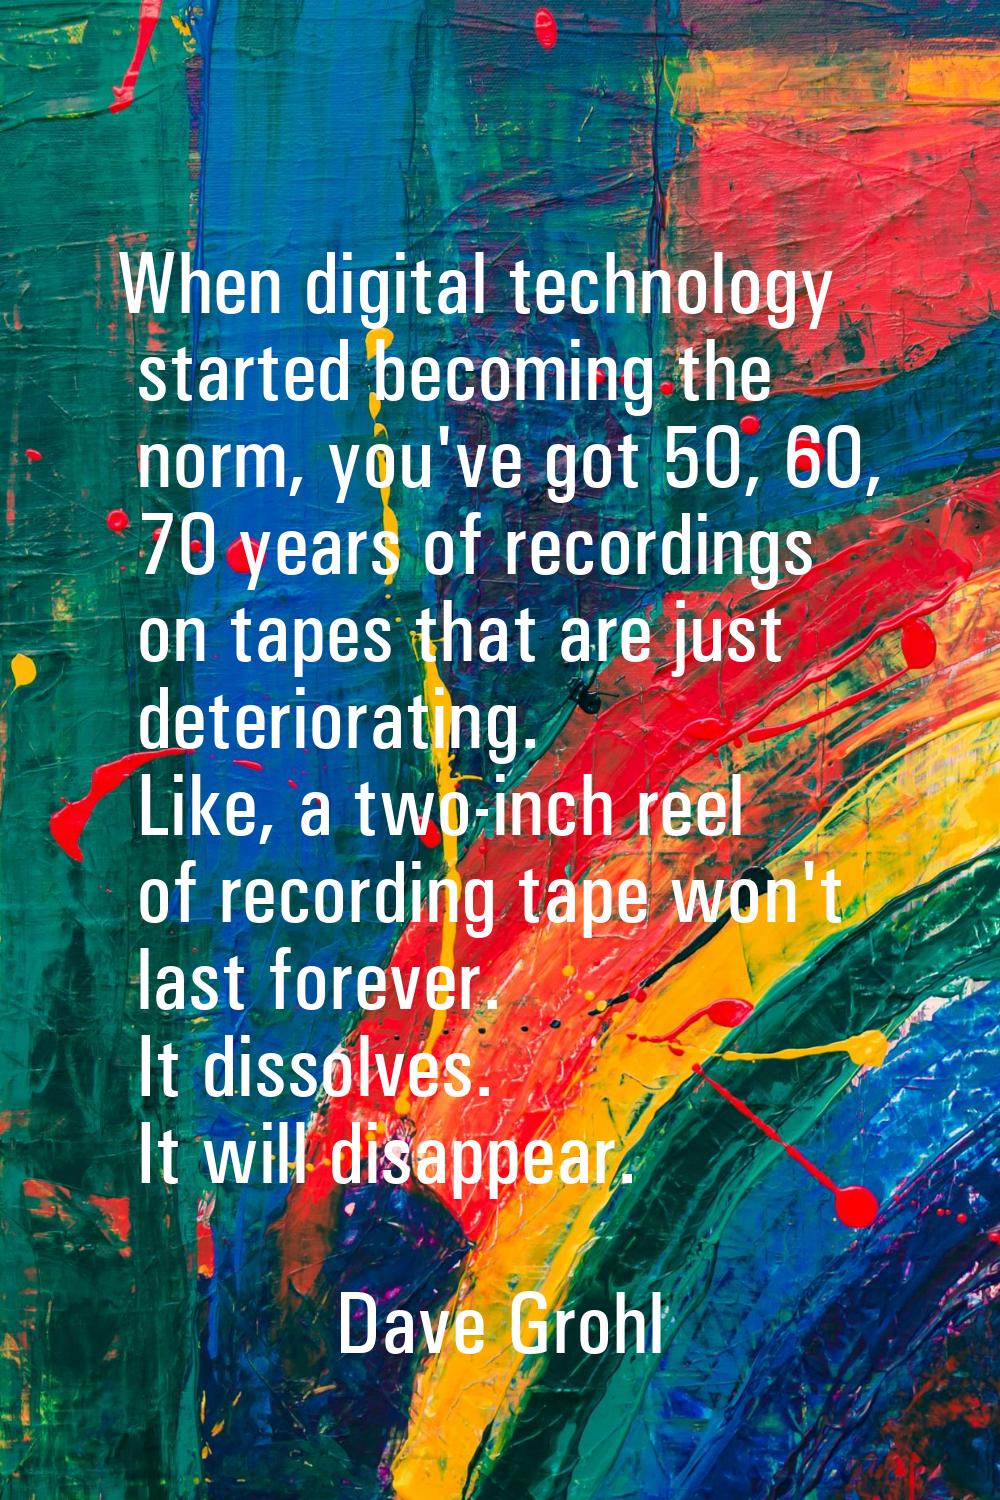 When digital technology started becoming the norm, you've got 50, 60, 70 years of recordings on tap